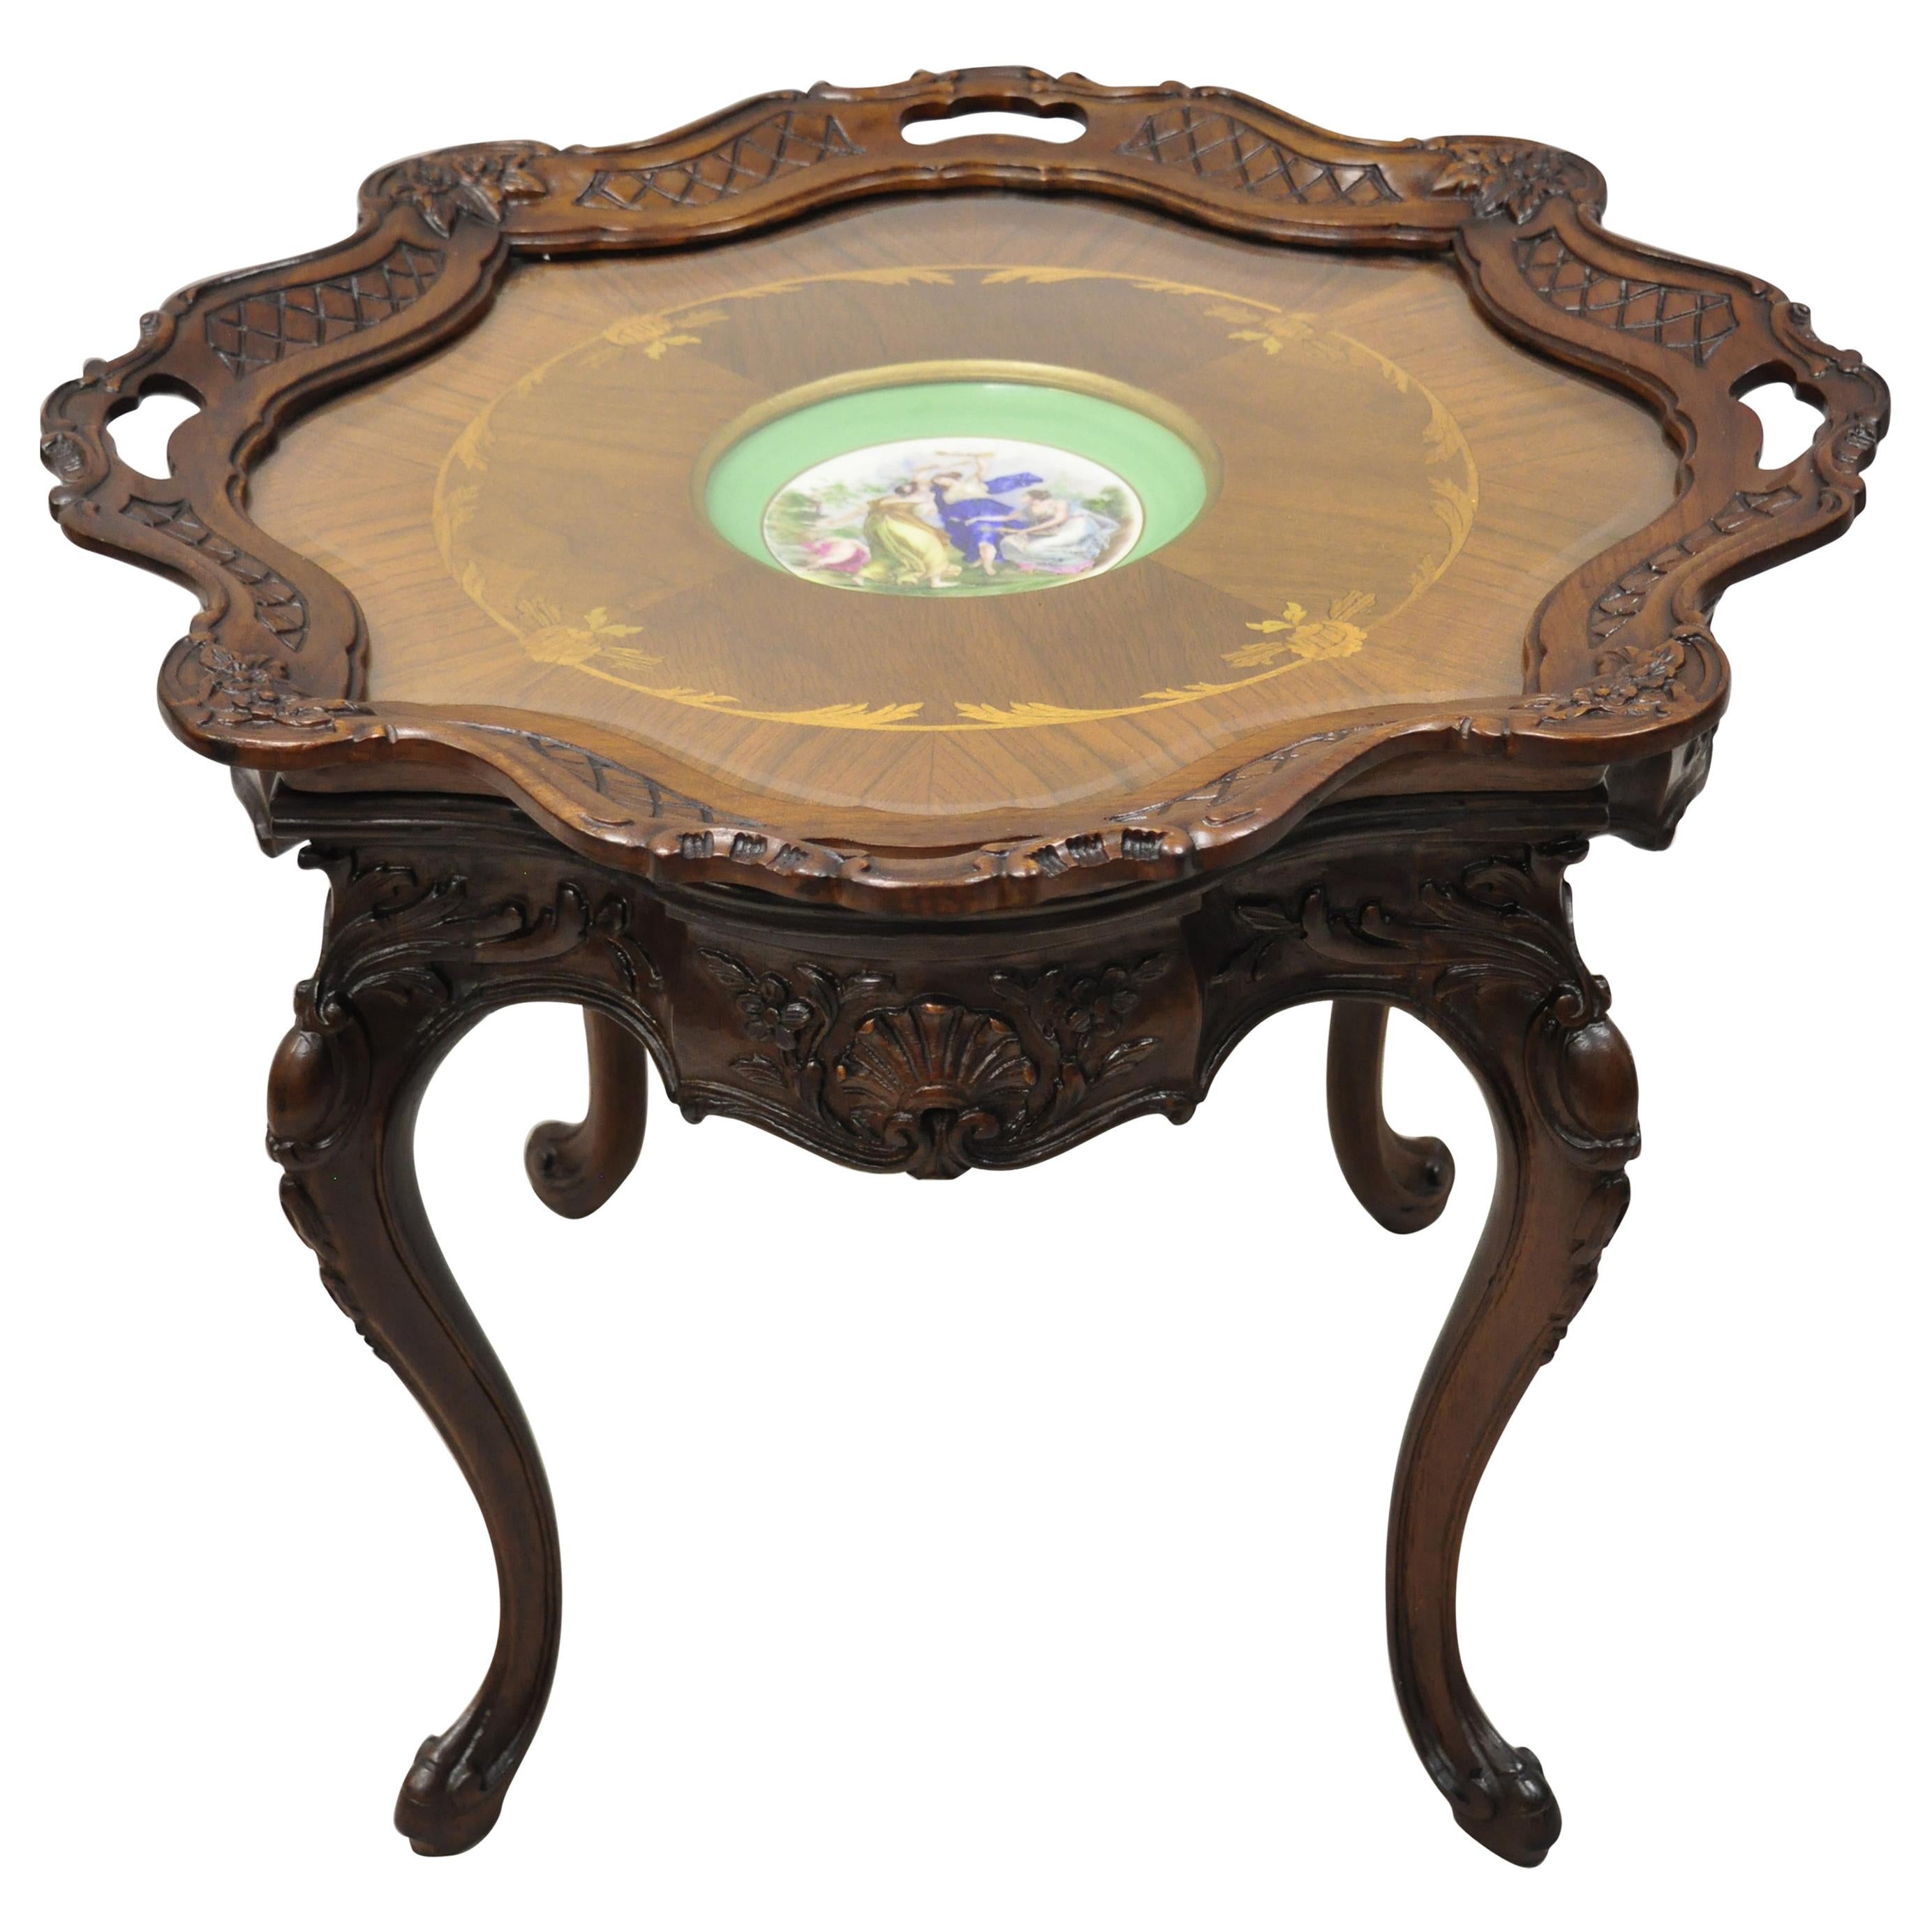 French Louis XV Inlaid Coffee Table with French Angelica Kauffman Porcelain Dish